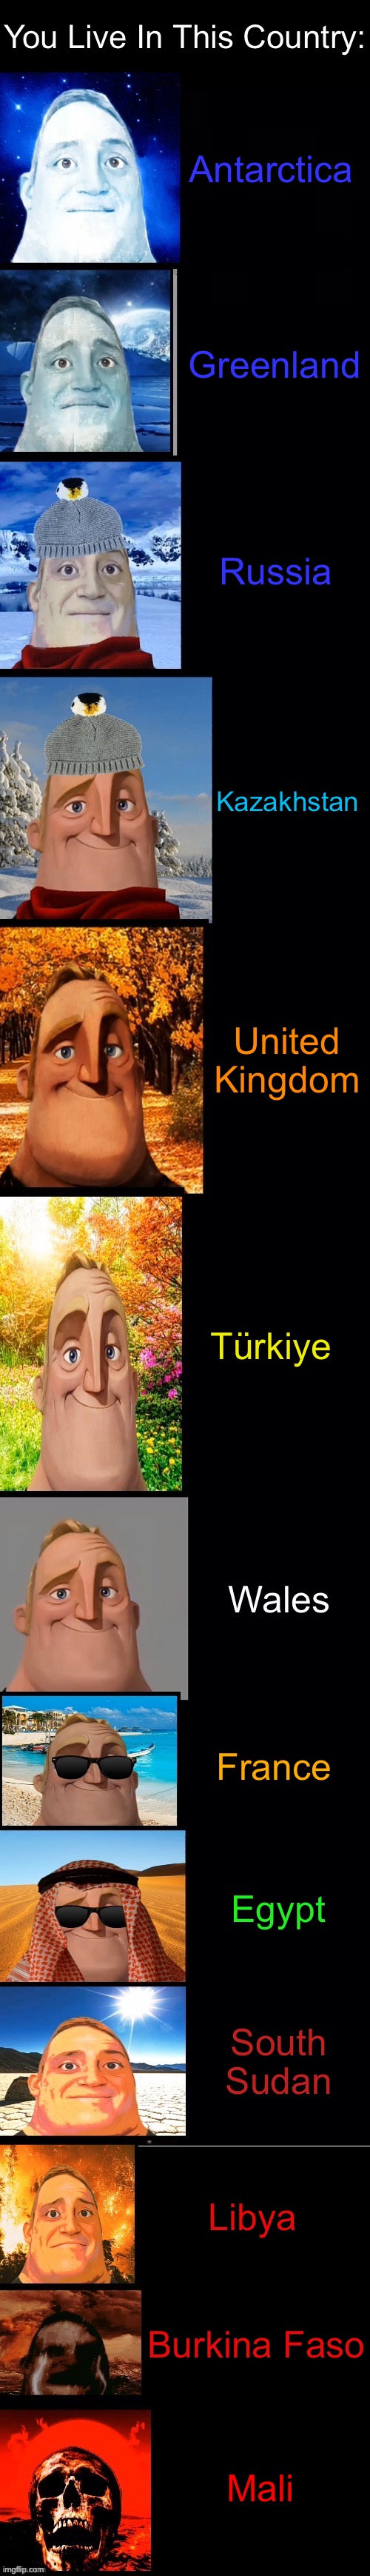 New Template. (Mr Incredible Becoming Cold To Hot) | You Live In This Country:; Antarctica; Greenland; Russia; Kazakhstan; United Kingdom; Türkiye; Wales; France; Egypt; South Sudan; Libya; Burkina Faso; Mali | image tagged in mr incredible becoming cold to hot clone,mr incredible becoming cold to hot | made w/ Imgflip meme maker